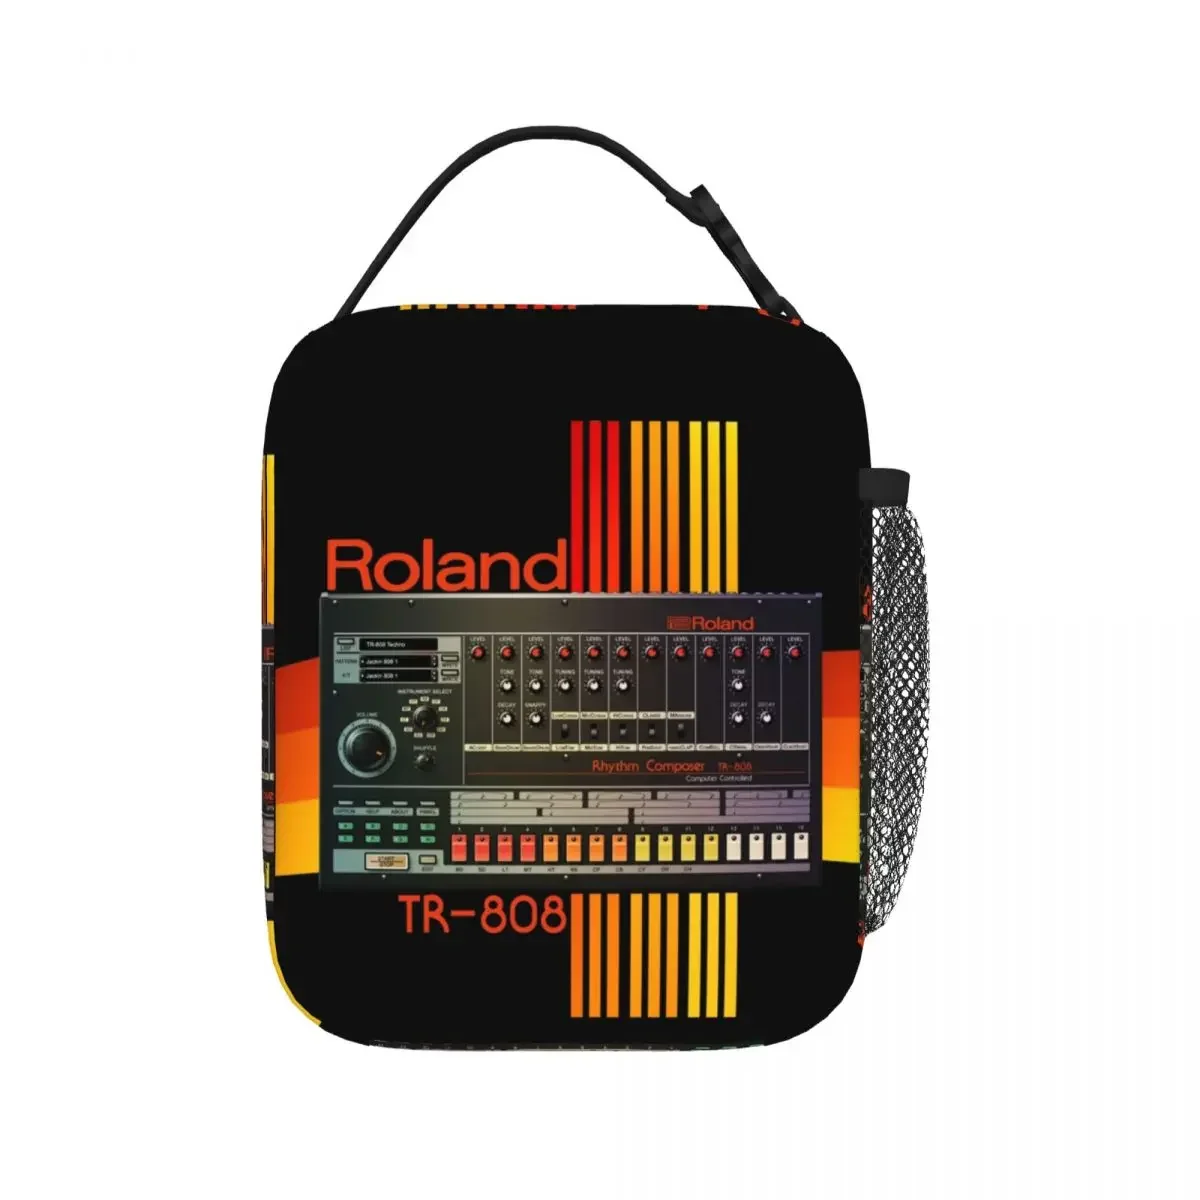 

Roland Tr-808 Drum Machine Model Insulated Lunch Bags Picnic Bags Thermal Cooler Lunch Box Lunch Tote for Woman Work Kids School